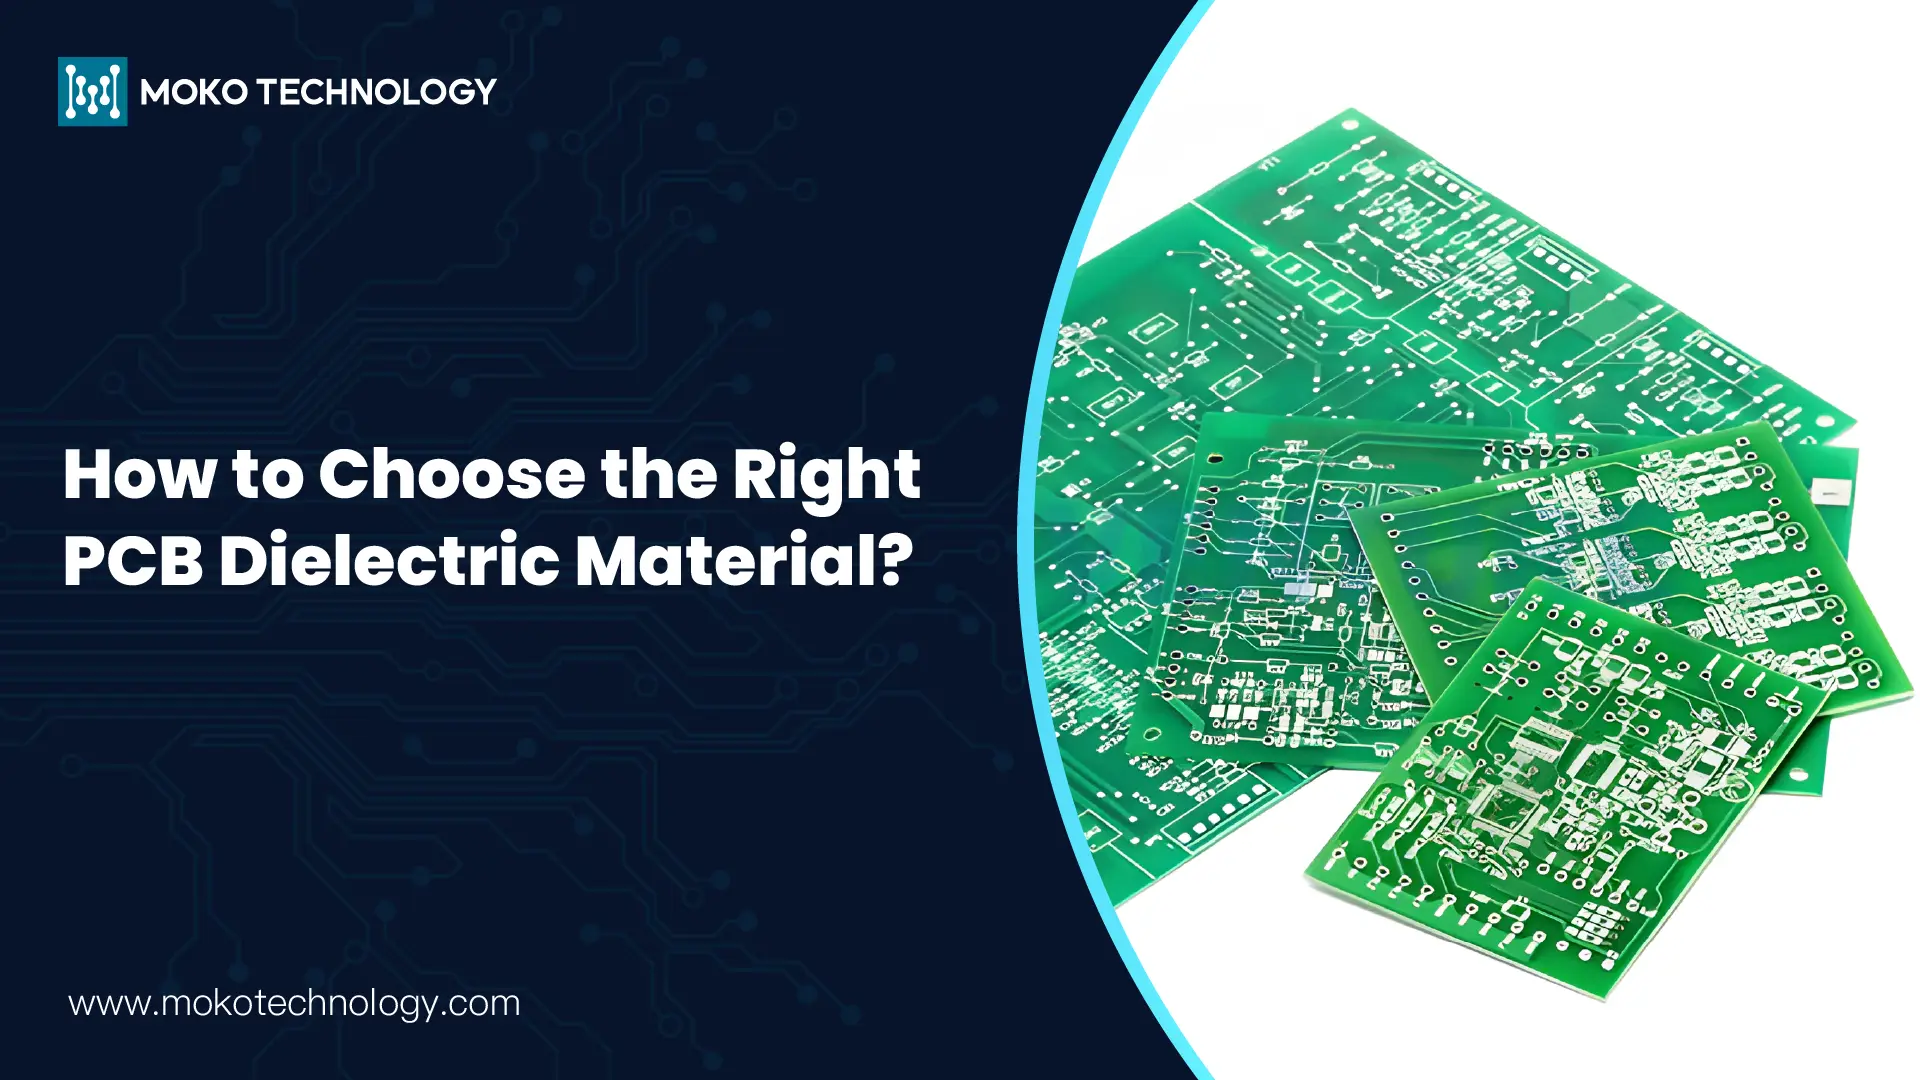 How to Choose the Right PCB Dielectric Material